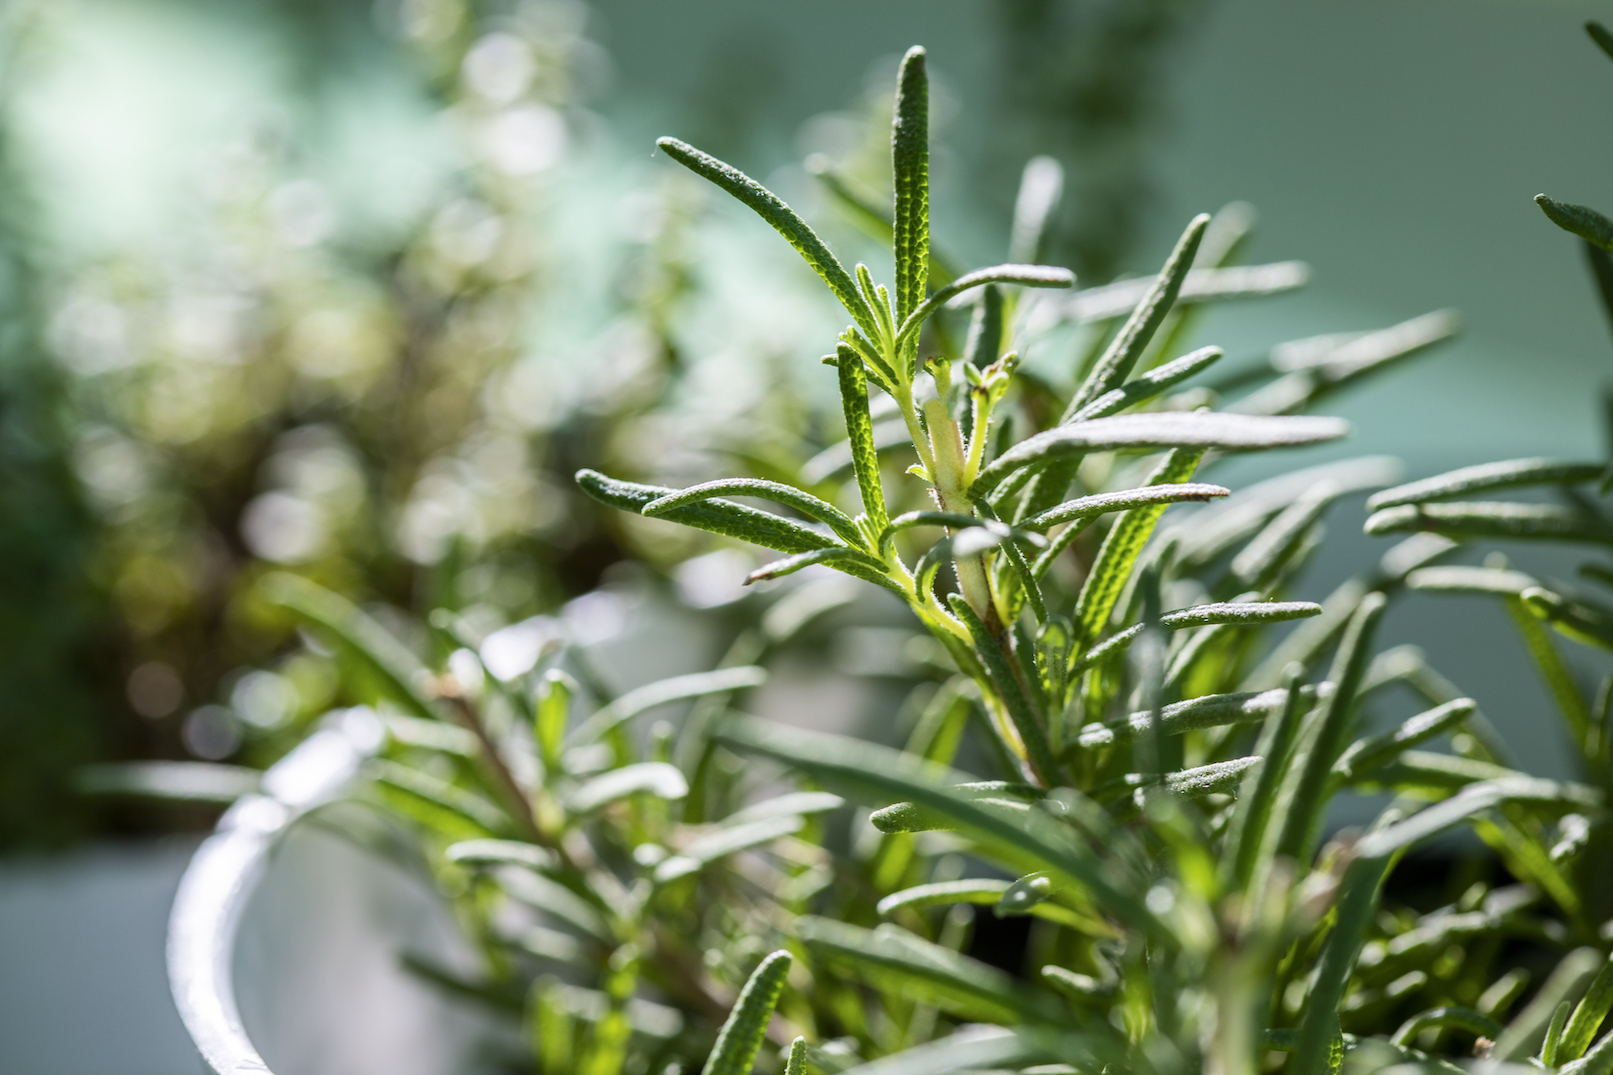 rosemary plant to prevent earwigs in hous